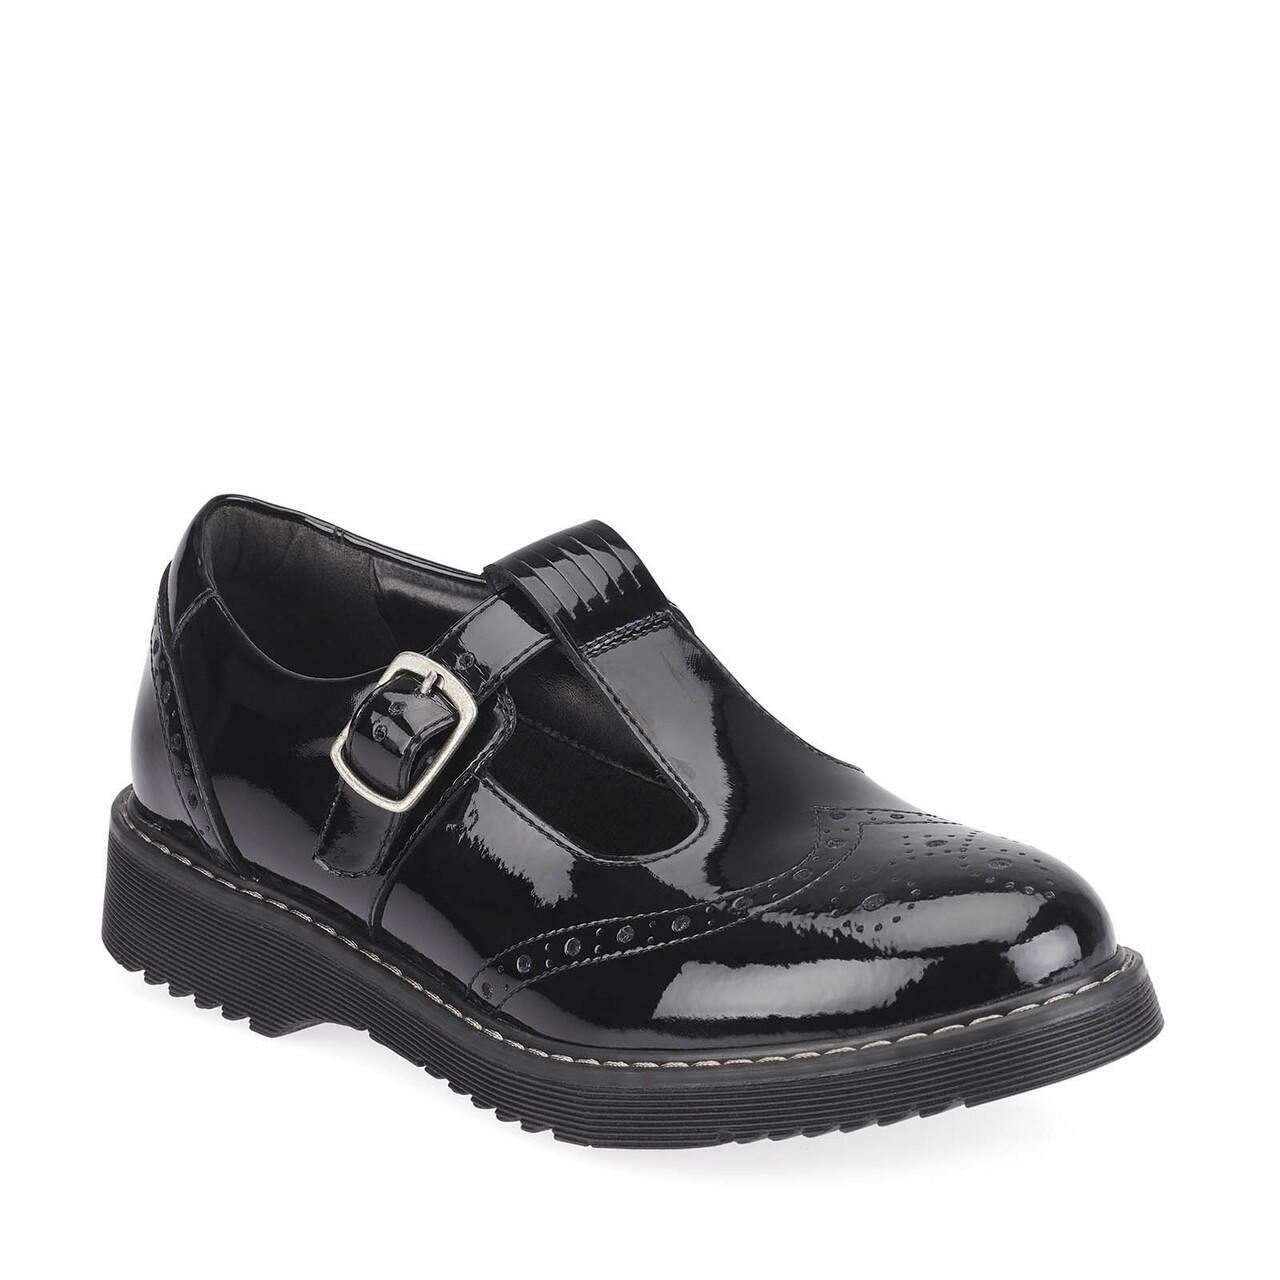 A girls T-Bar school shoe by Start Rite,style Imagine, in black patent with buckle fastening. Angled view.